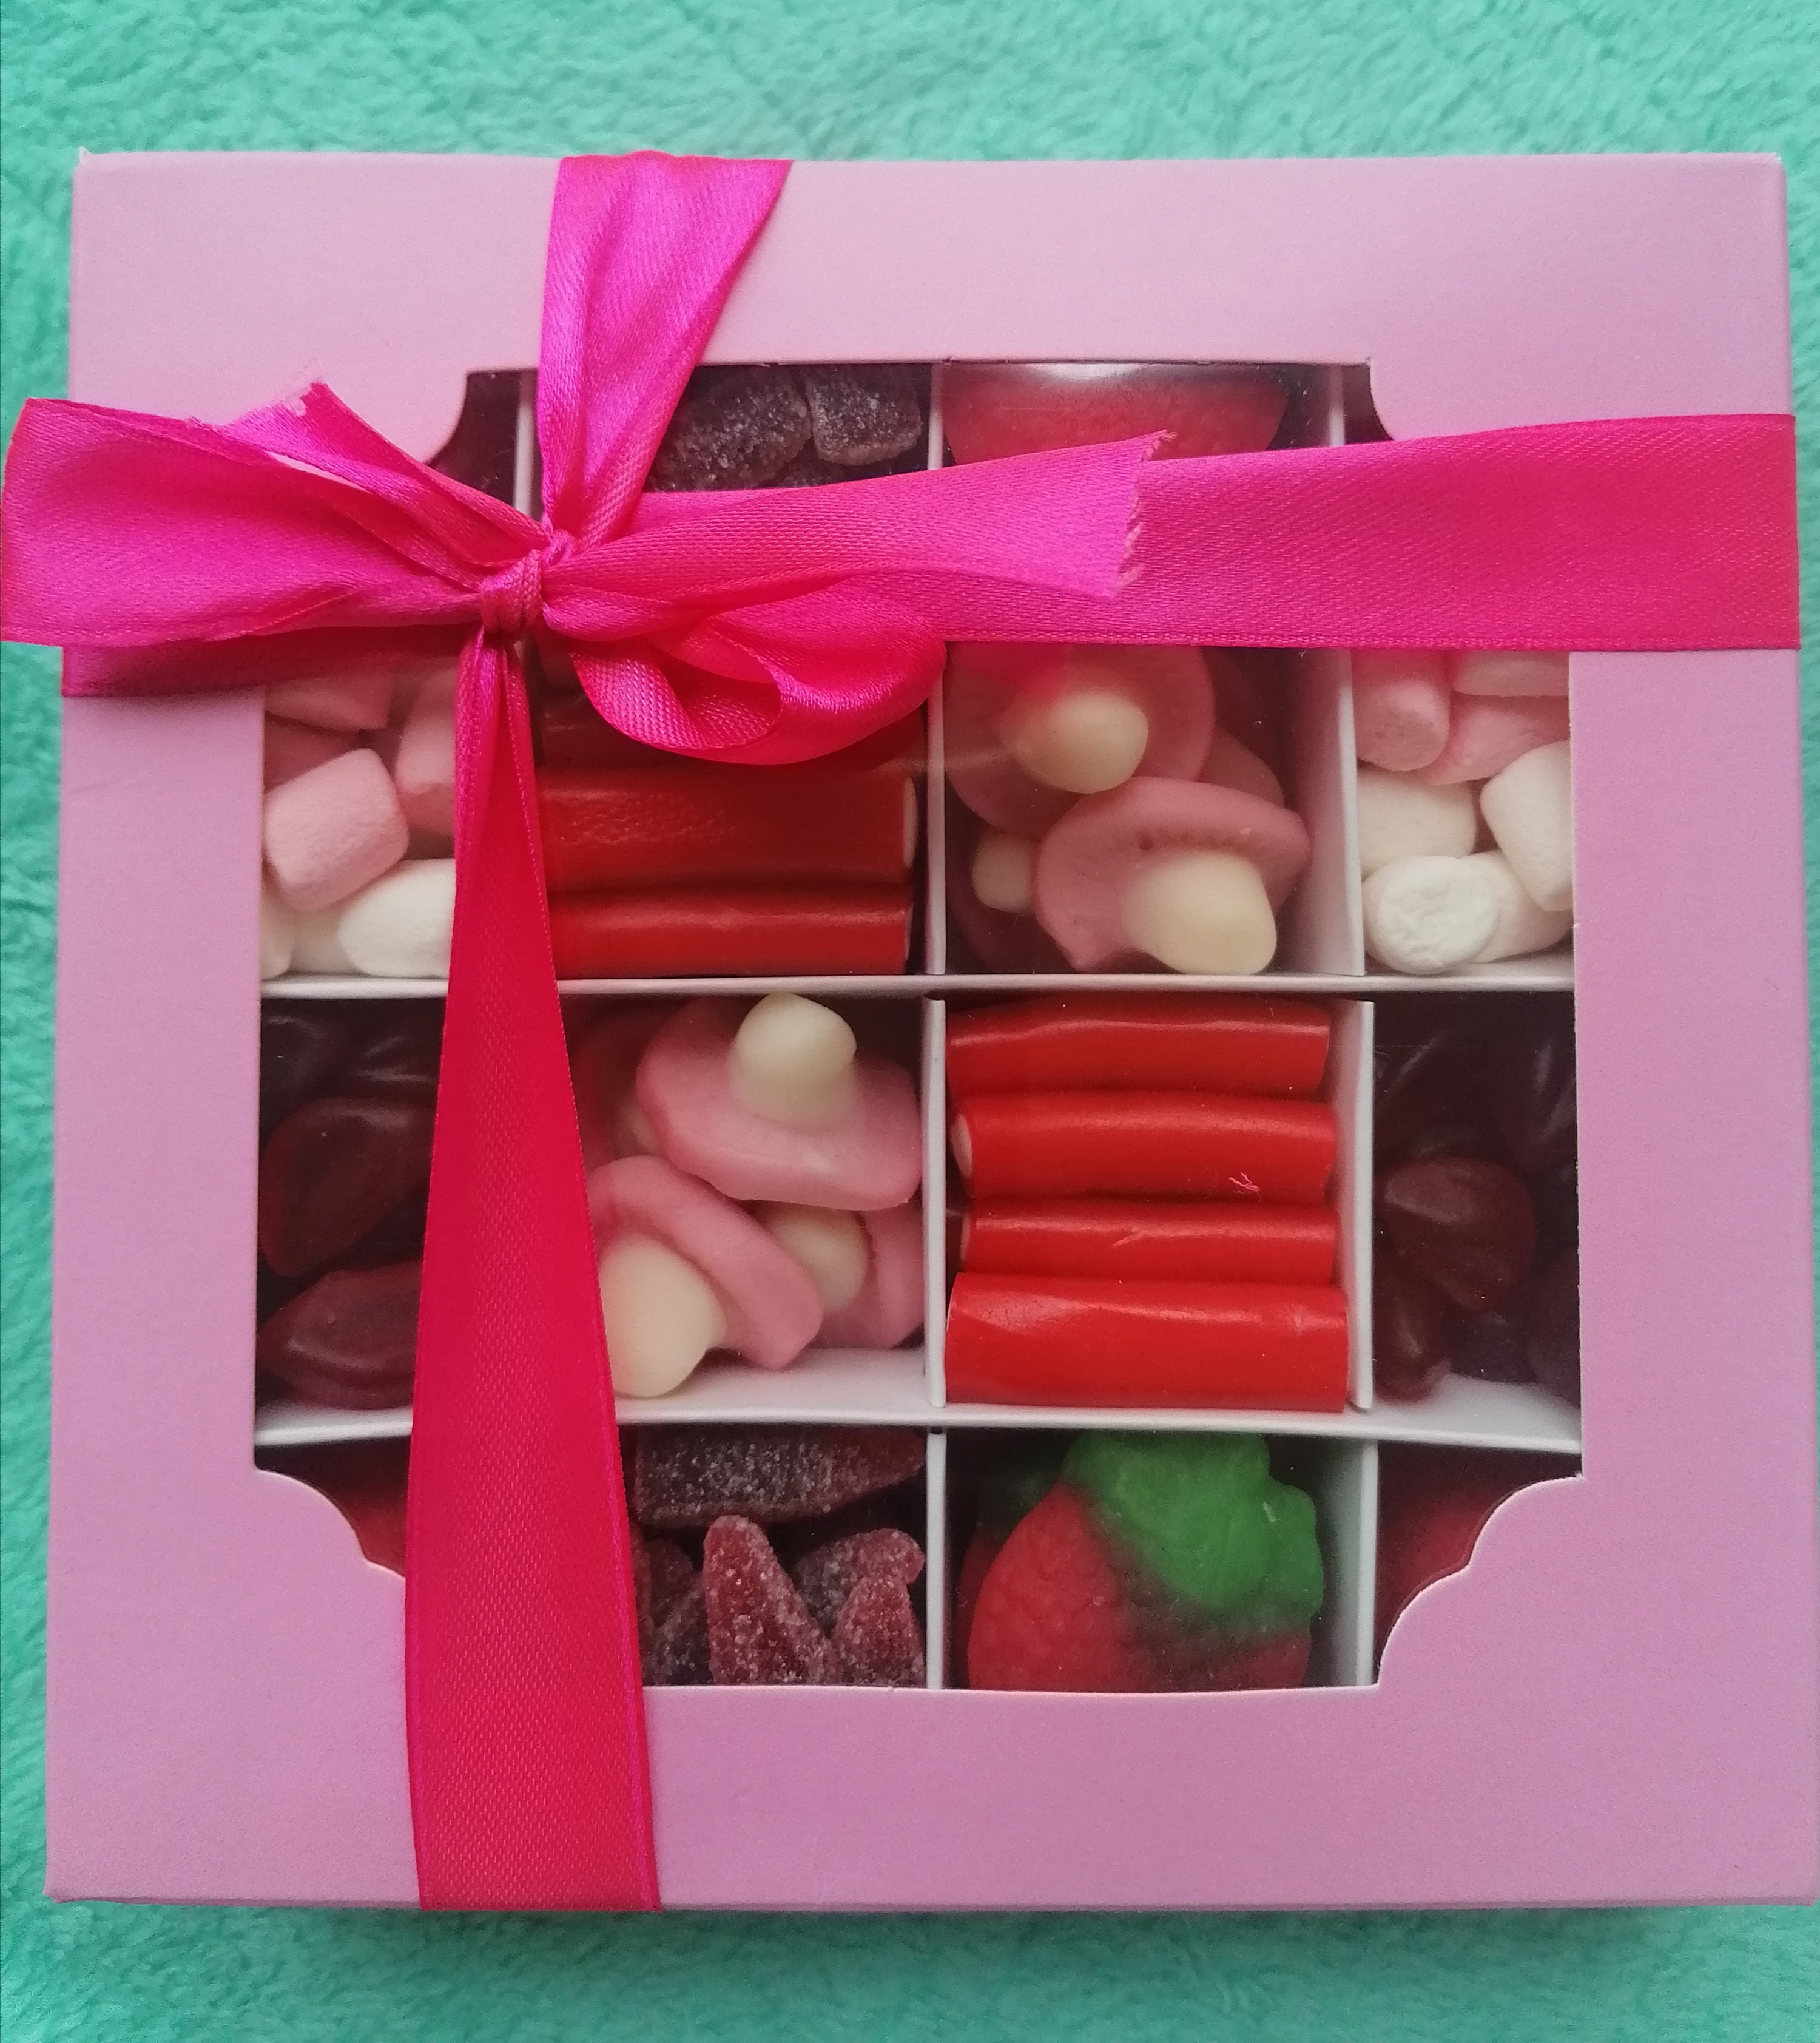 Pink Sweets Selection Box